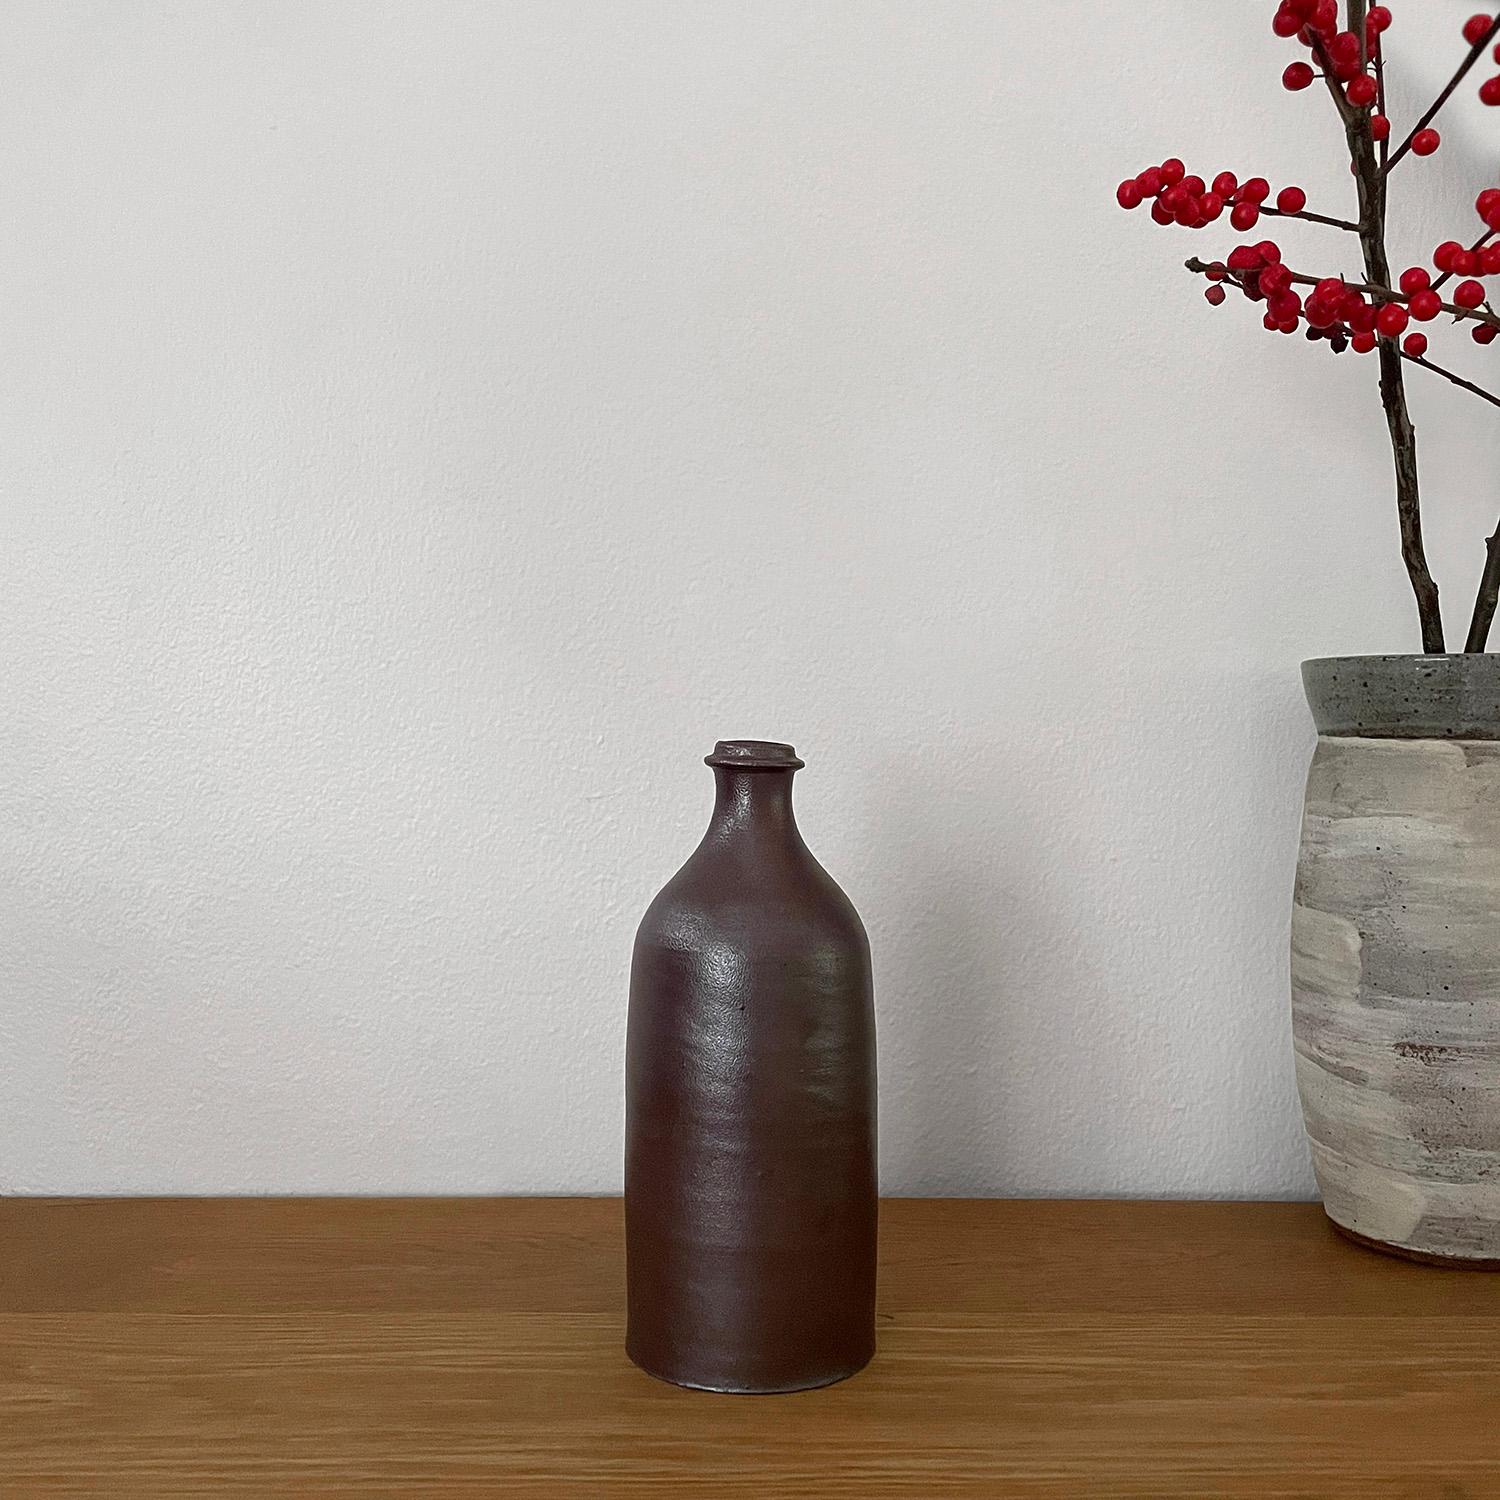 French stoneware bottle 
Neutral toned ceramic stoneware ceramic bottle 
Organic composition and feel
Vessel has not been tested to hold water
Patina from age and use
Last two photos are for reference only 
Please see other listings